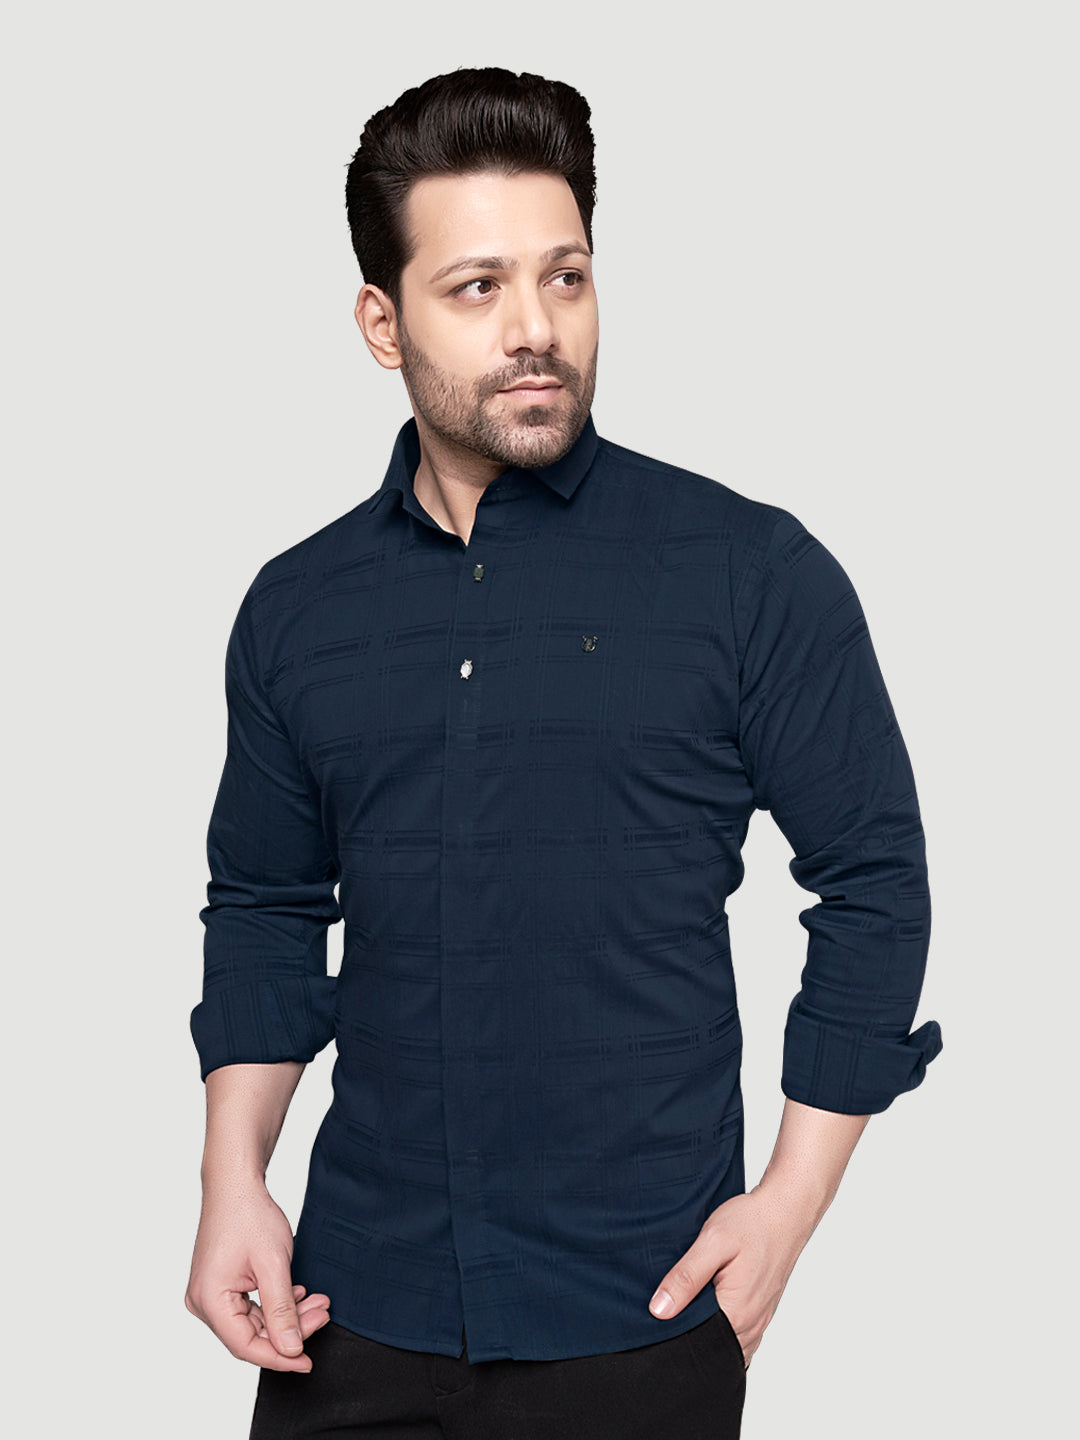 Black and White Shirts Designer Shirts with Collar Accessories- Blue